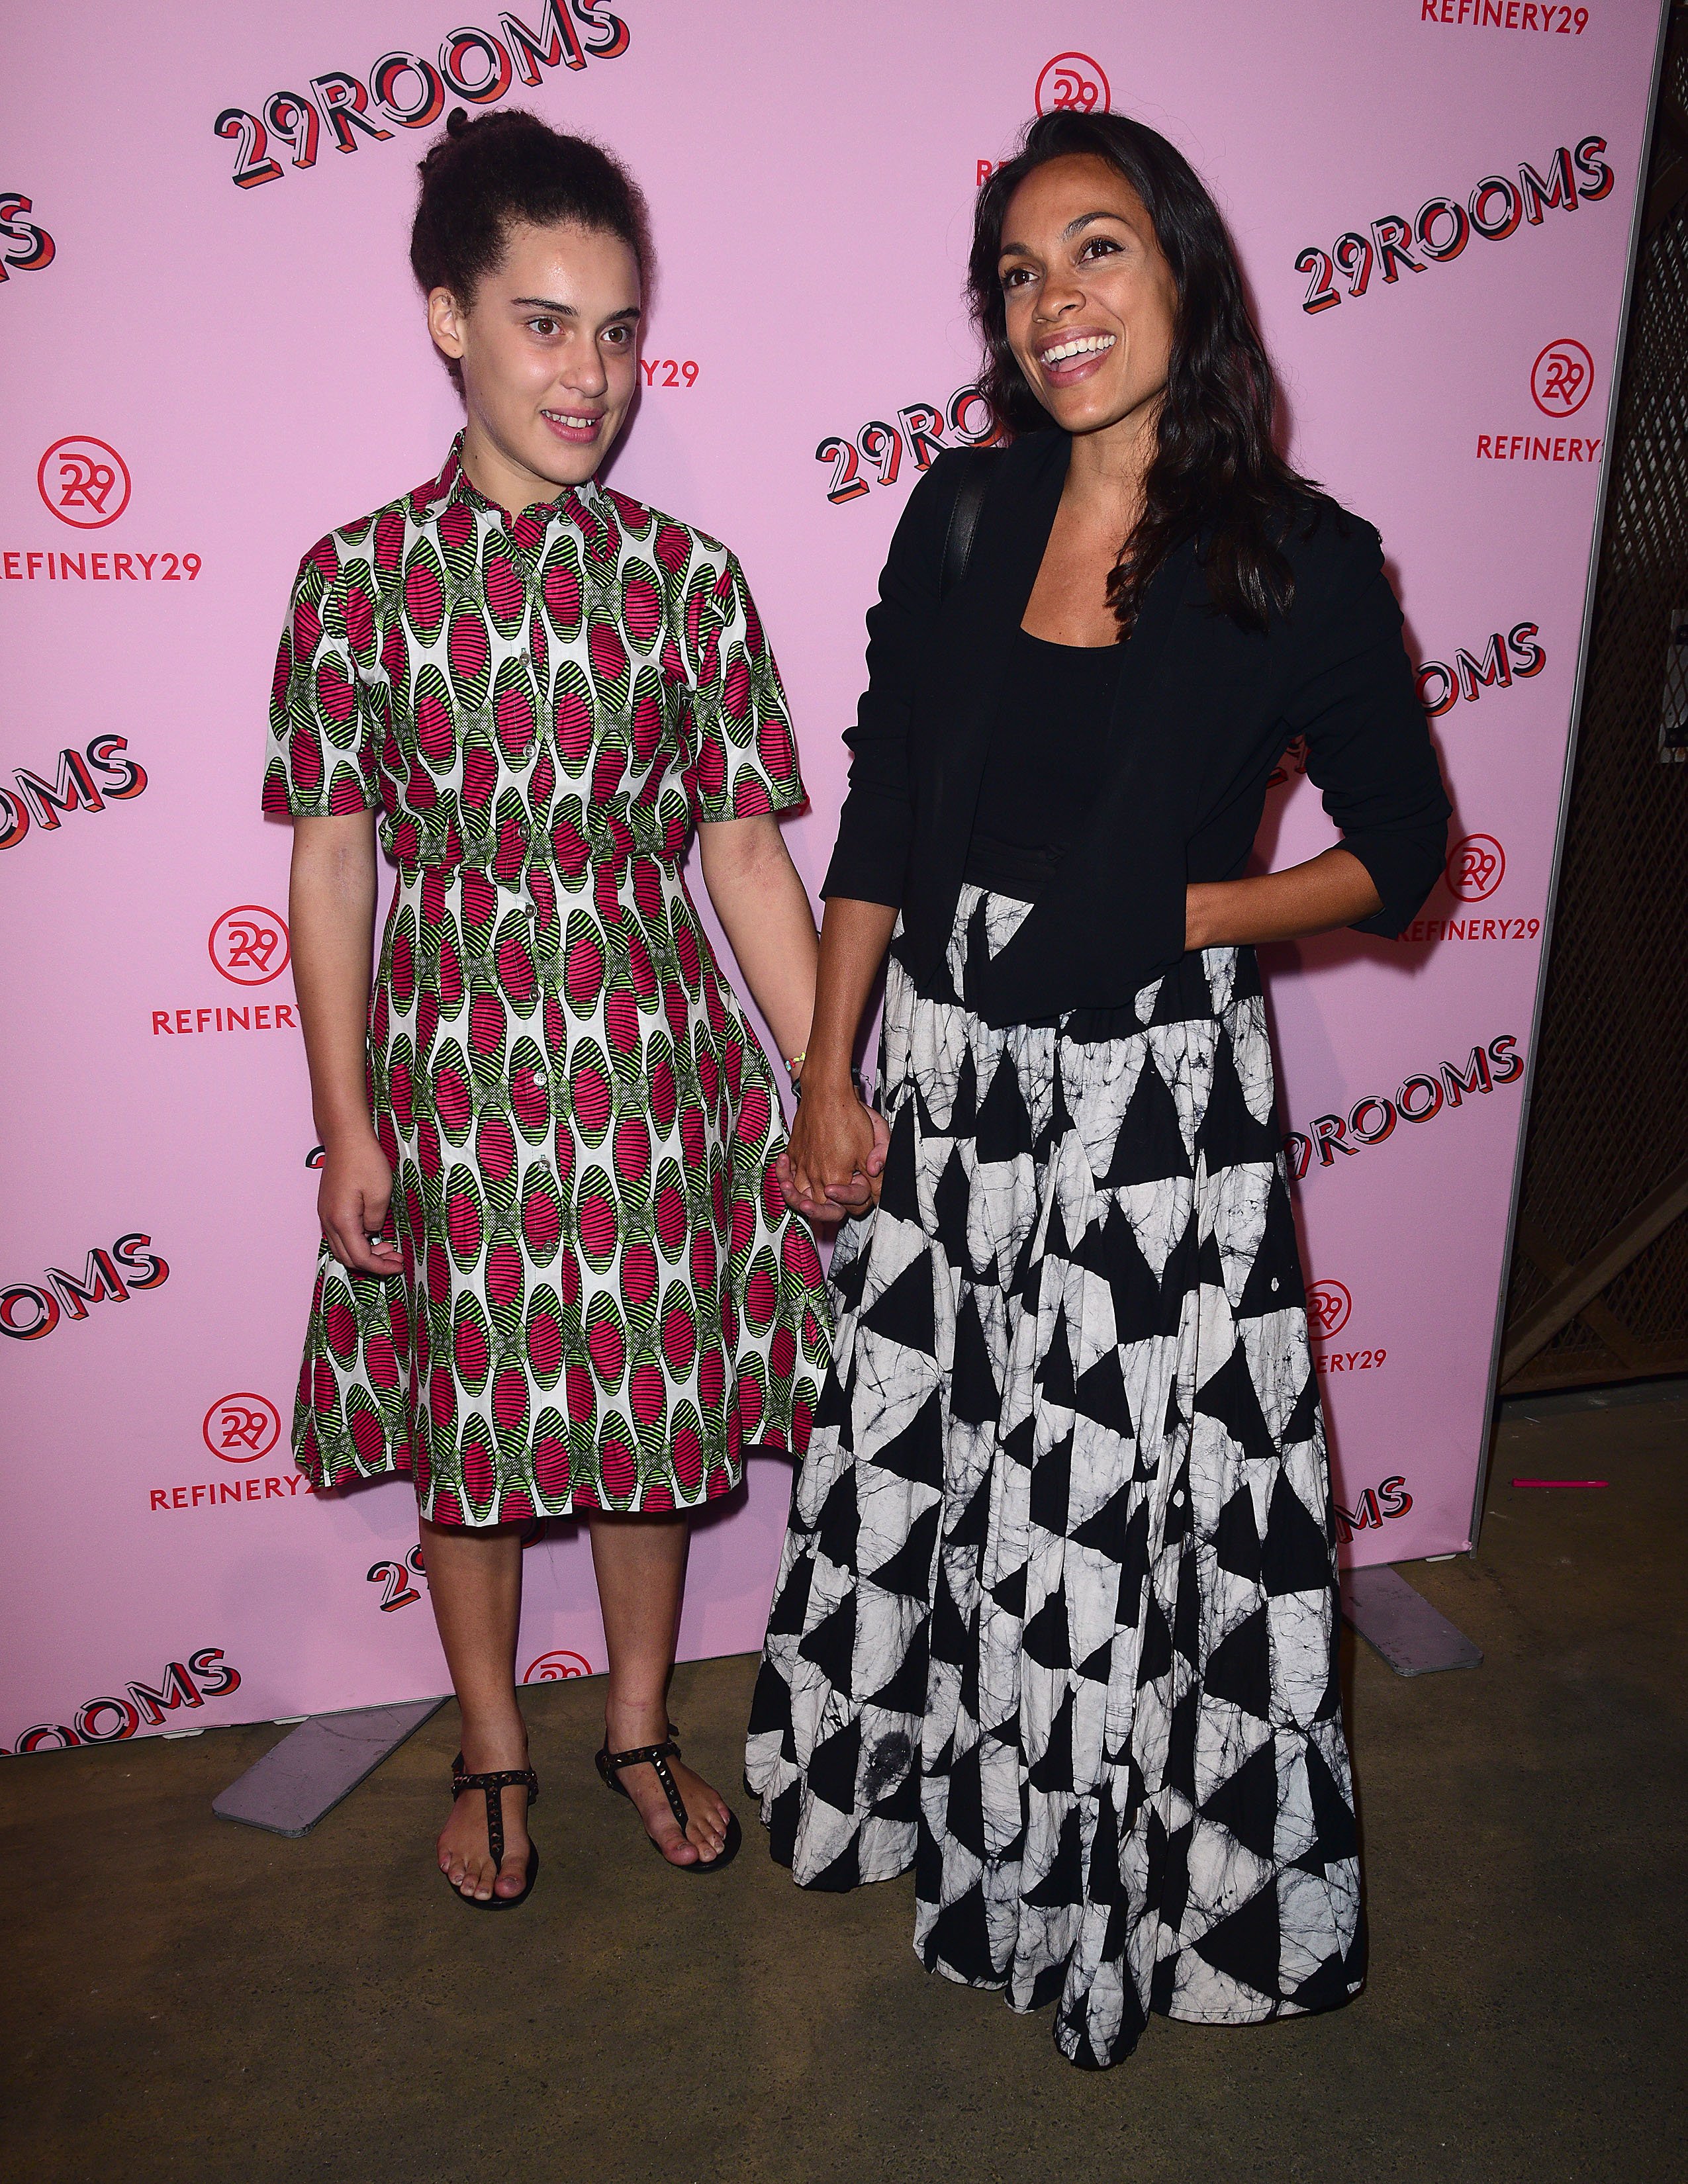 Rosario Dawson  and Lola Dawson attend Refinery29's "29Rooms: Turn It Into Art" at 106 Wythe Ave on September 7, 2017 in New York City. | Photo: GettyImages